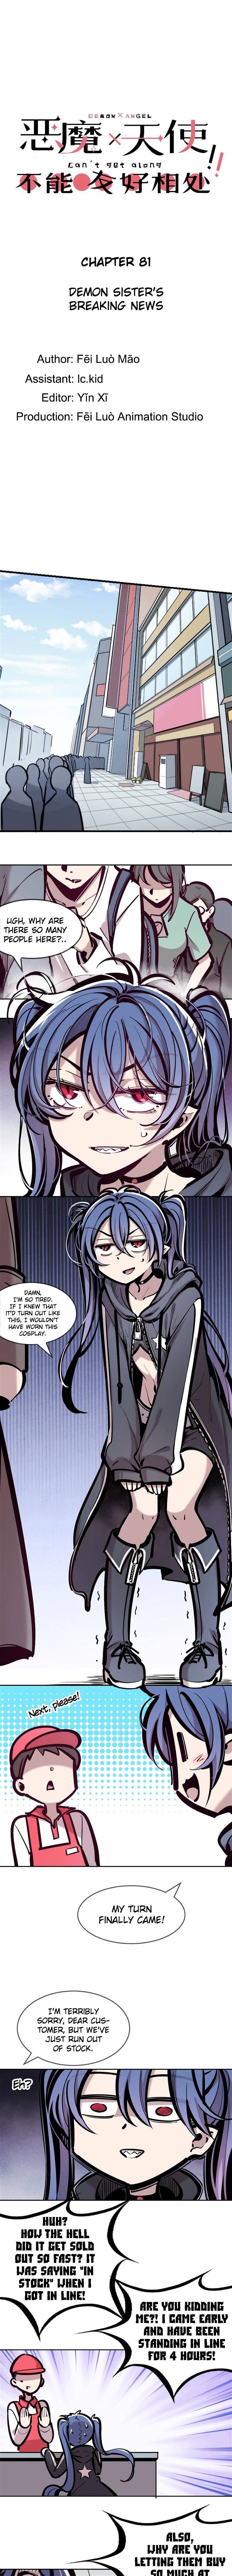 Demon X Angel, Can’T Get Along! Chapter 81 page 1